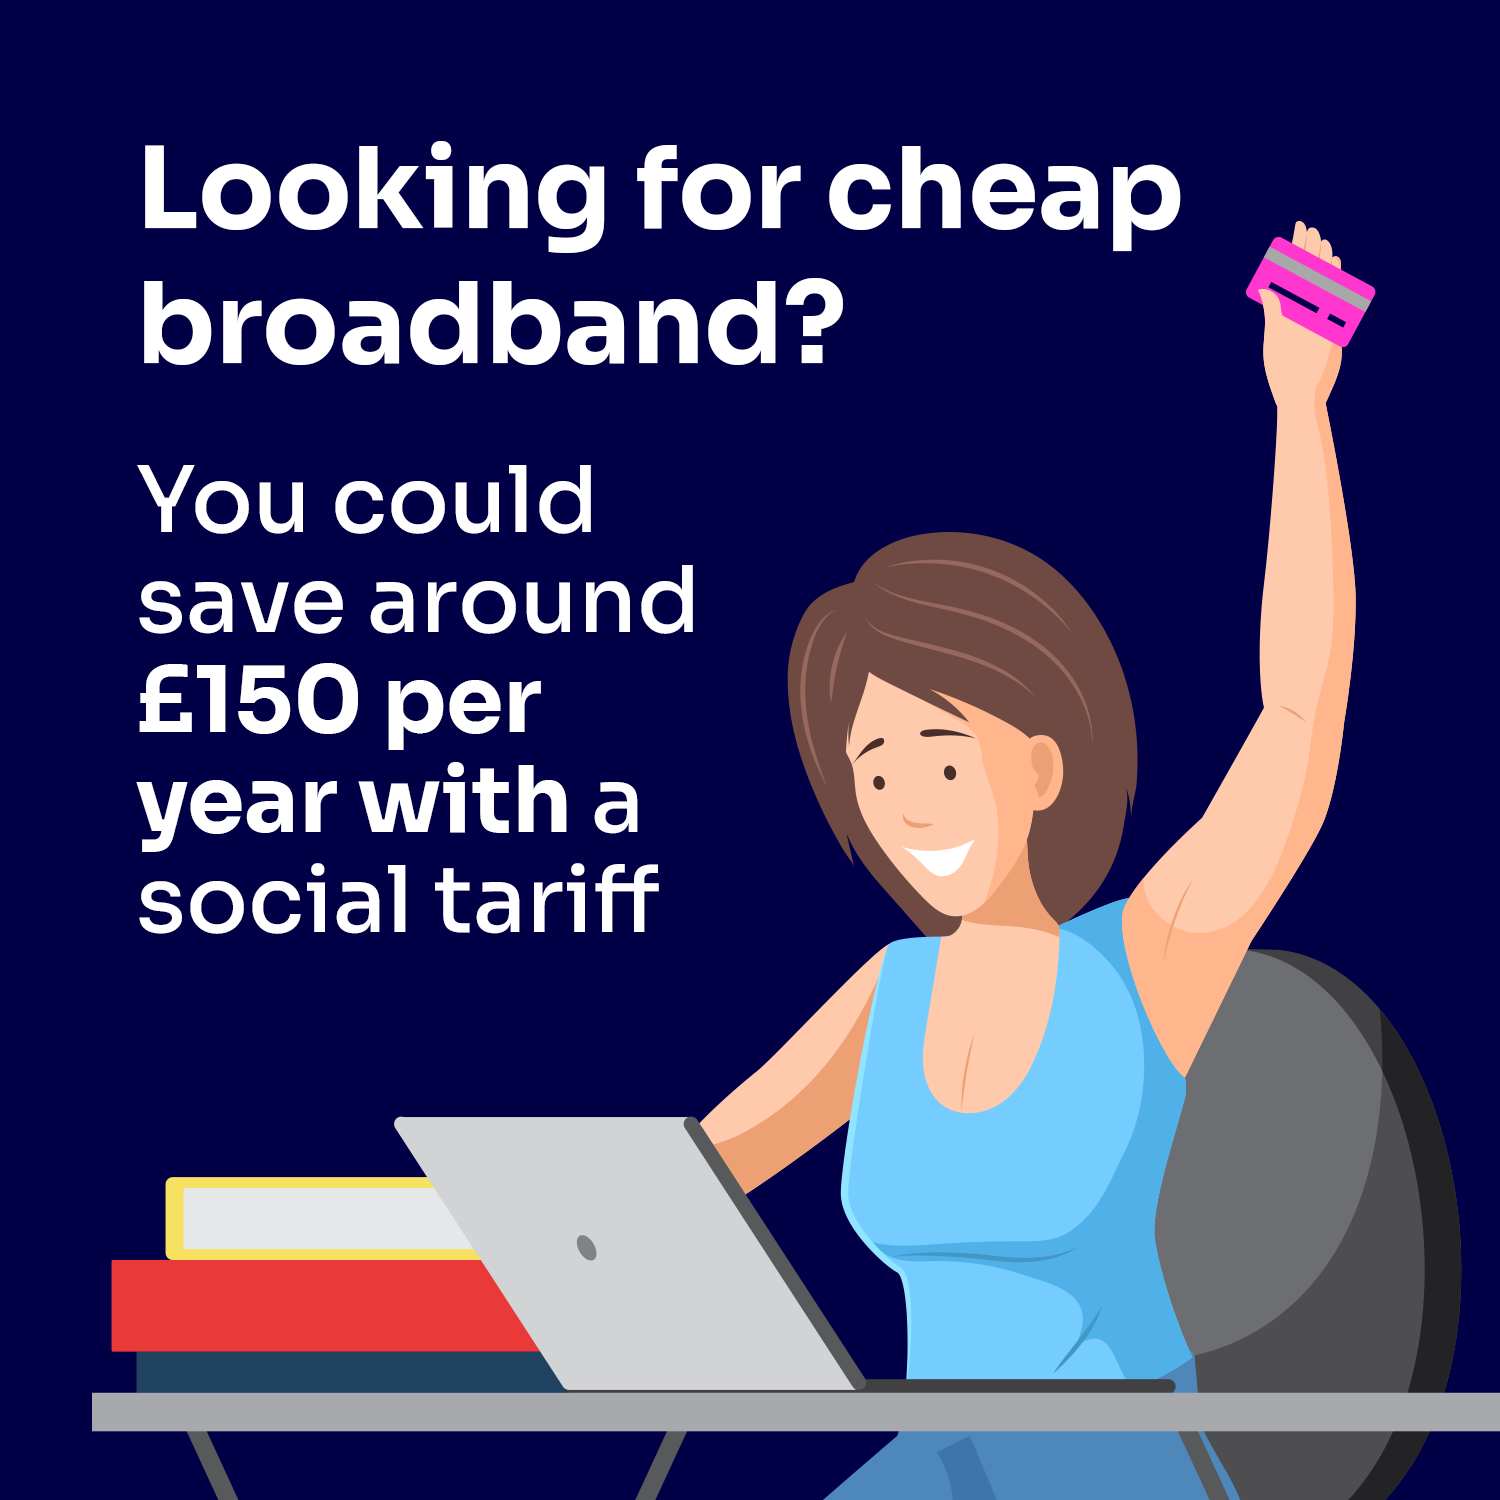 Looking for cheap broadband?